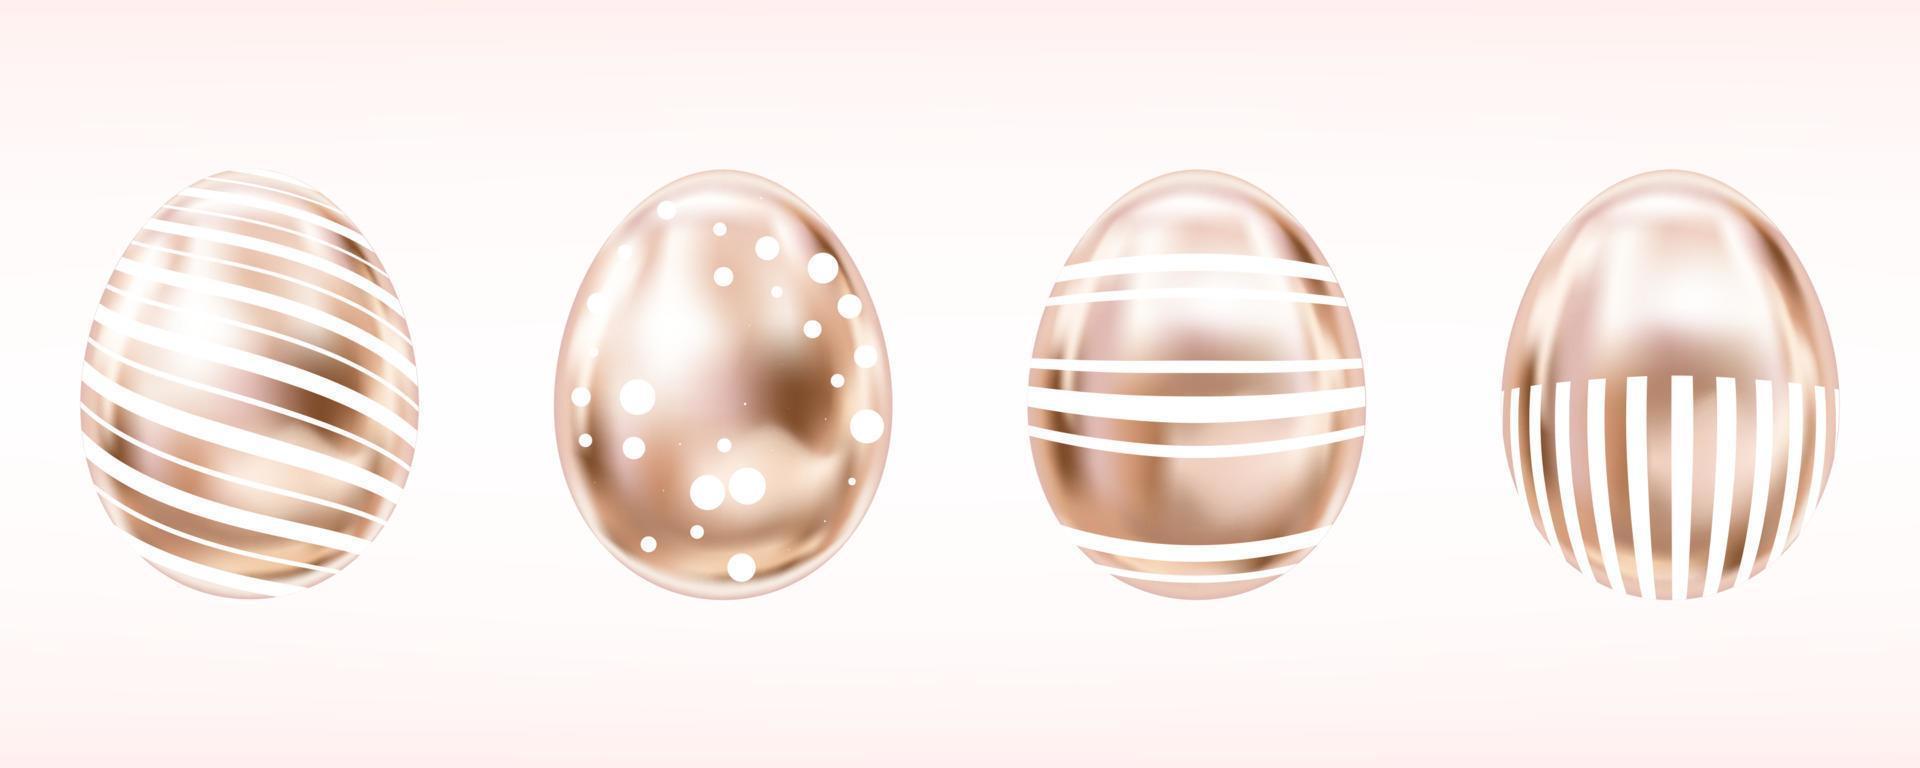 Four glance metallic eggs in pink color with white dots and stripes. Isolated objects for Easter vector